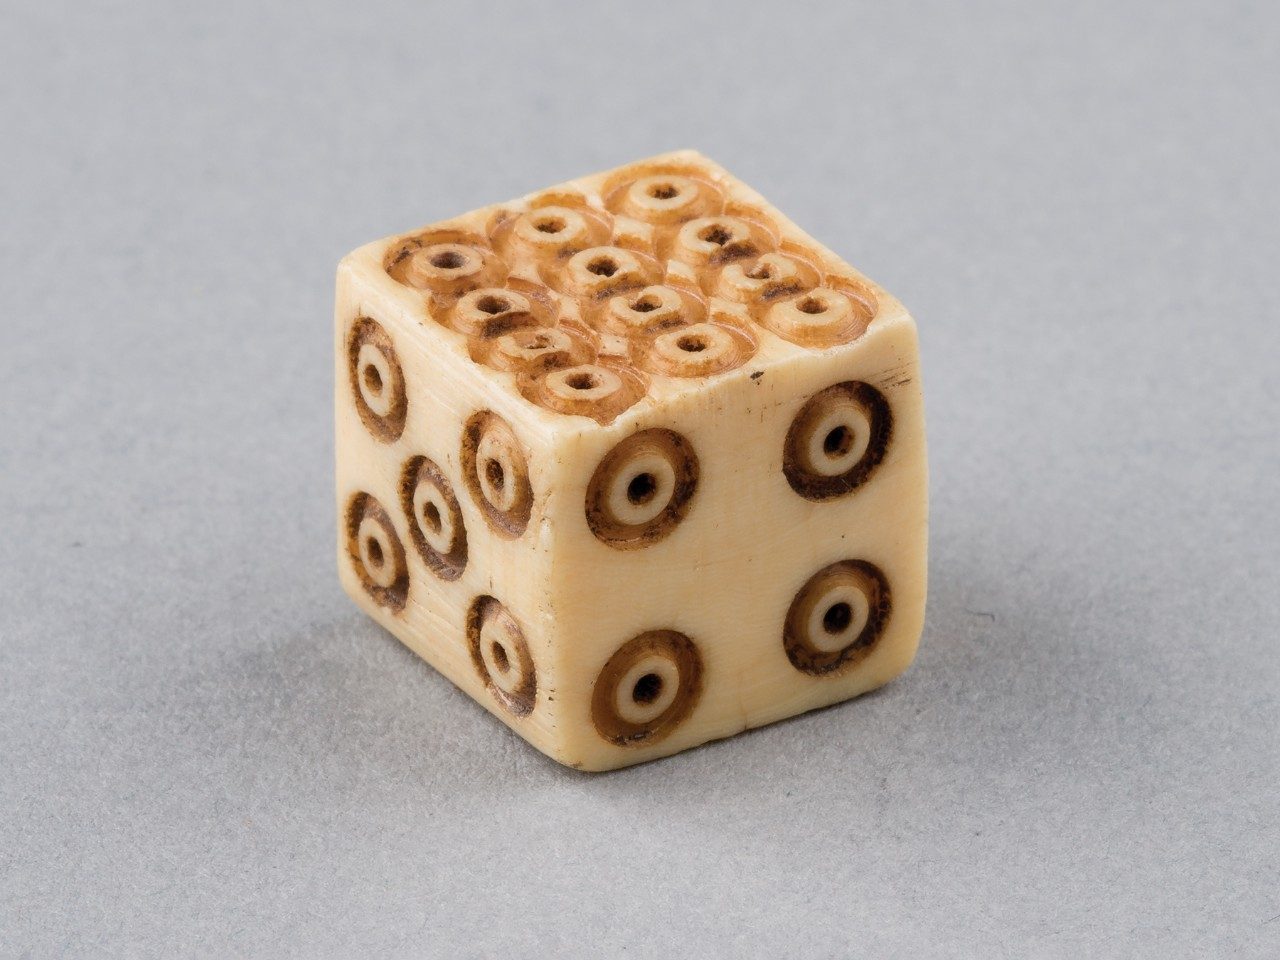 Six-sided bone die showing the 4, 5, and 12 sides. The pips are carved concentric circles.